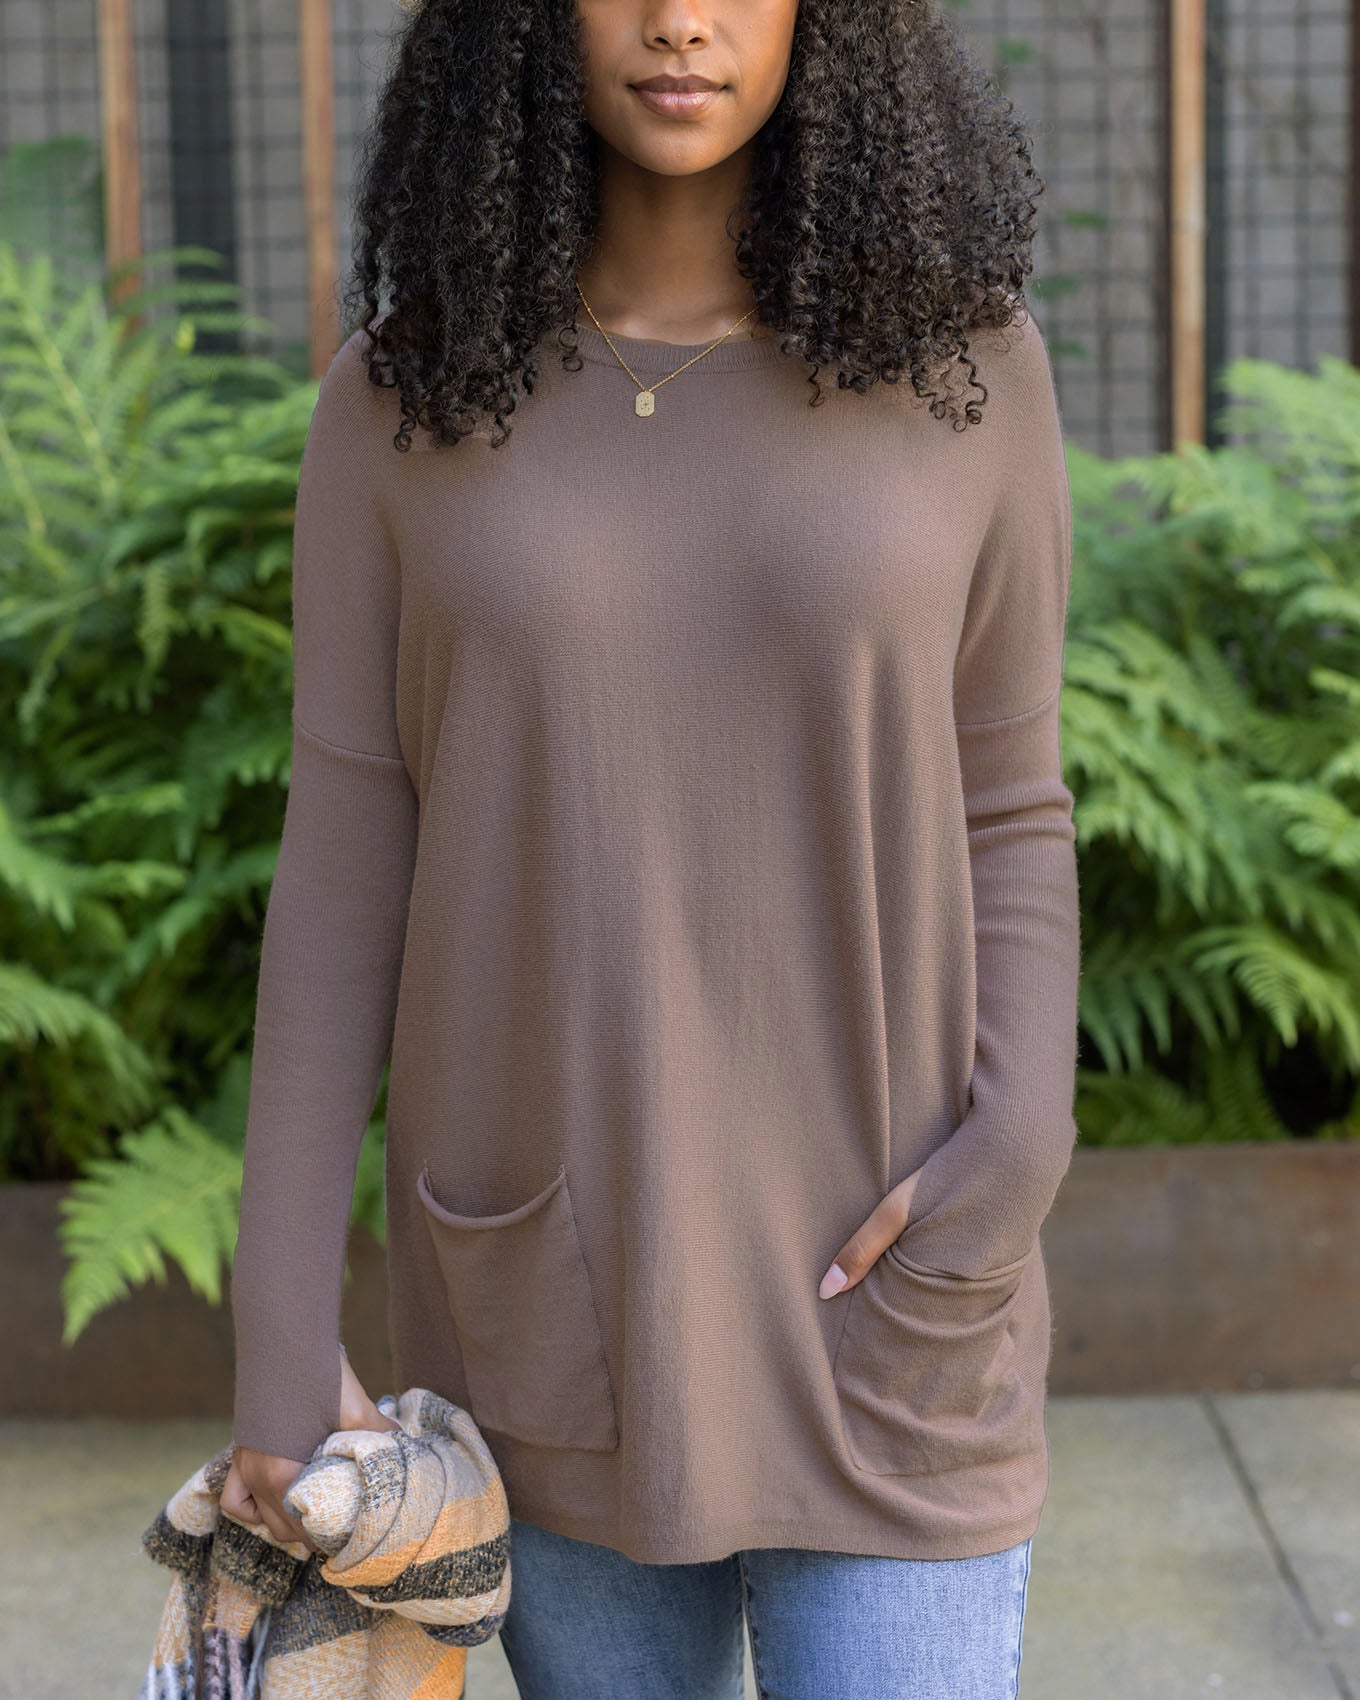 The Tunic You Need In Every Color - Beyoutiful Blog